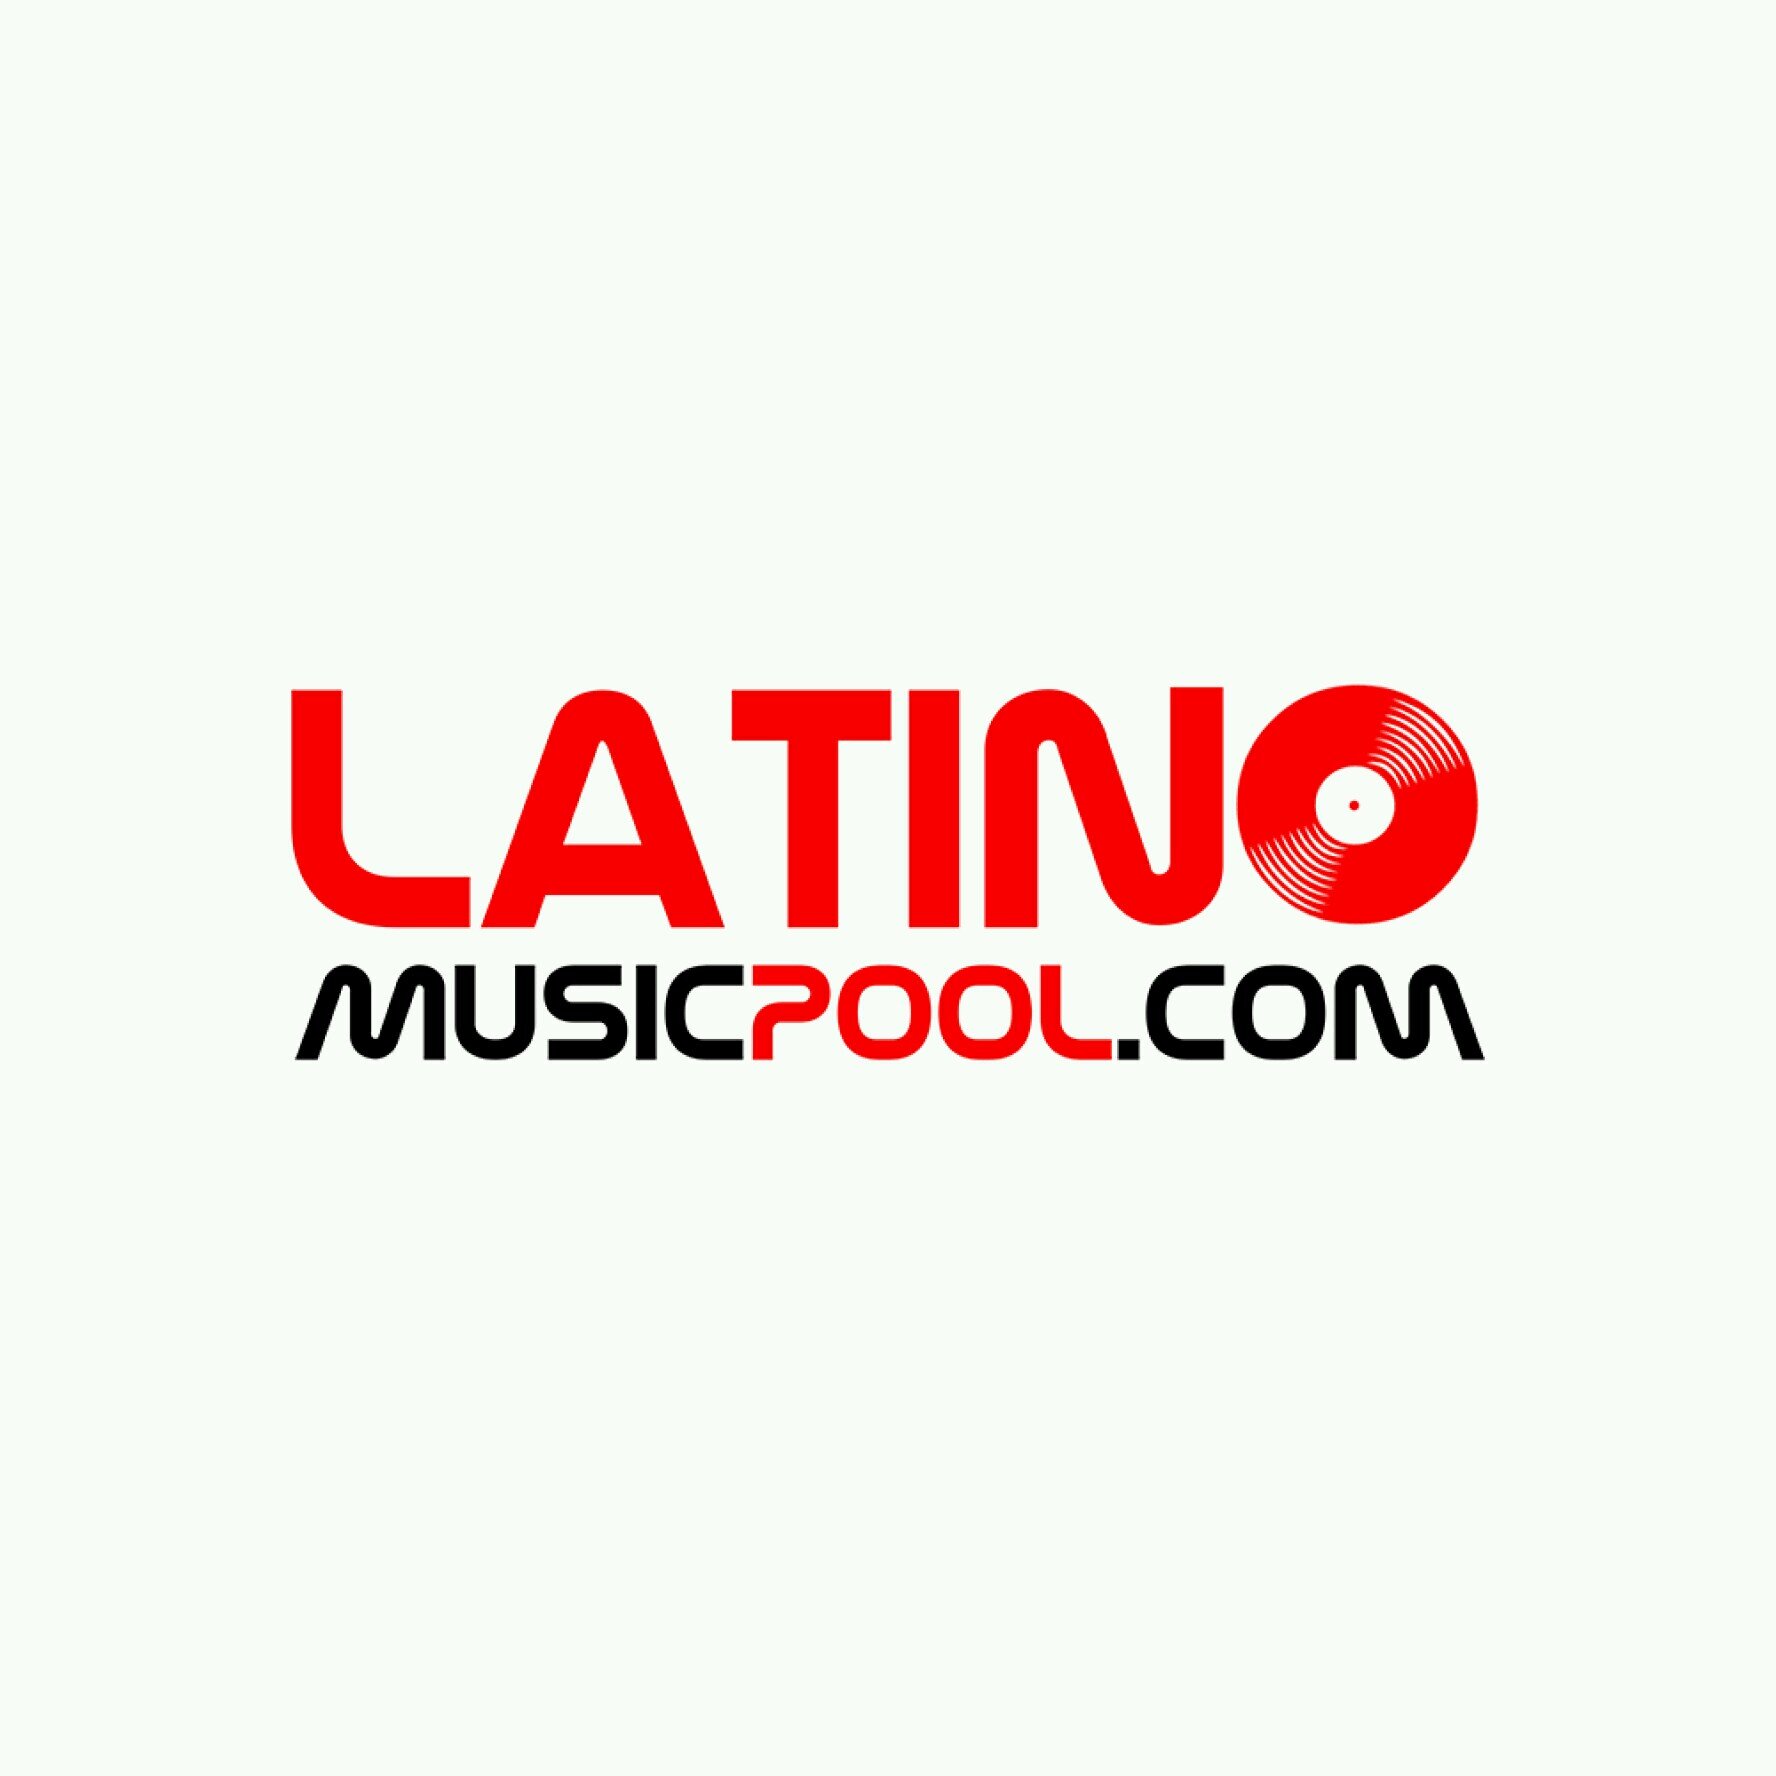 servicing djs with the latest latino music reggaeton, hip hop, house, bachata, merengue, pop, instrumentals, acapellas, intros, outros, party breaks y mas!